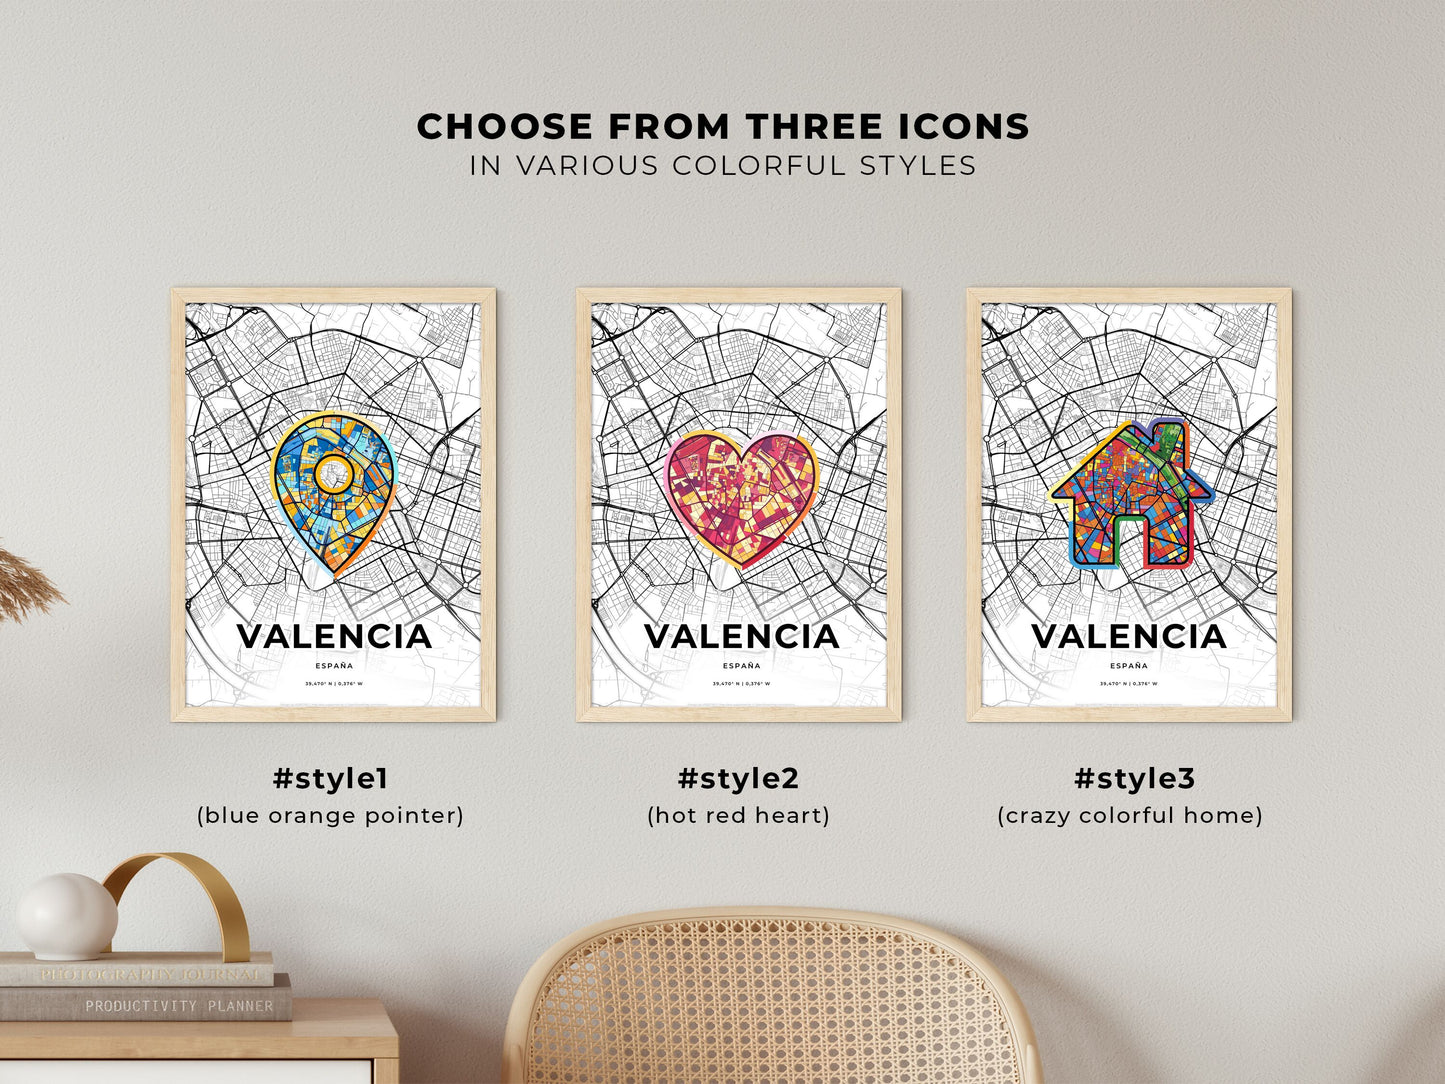 VALENCIA SPAIN minimal art map with a colorful icon. Where it all began, Couple map gift.